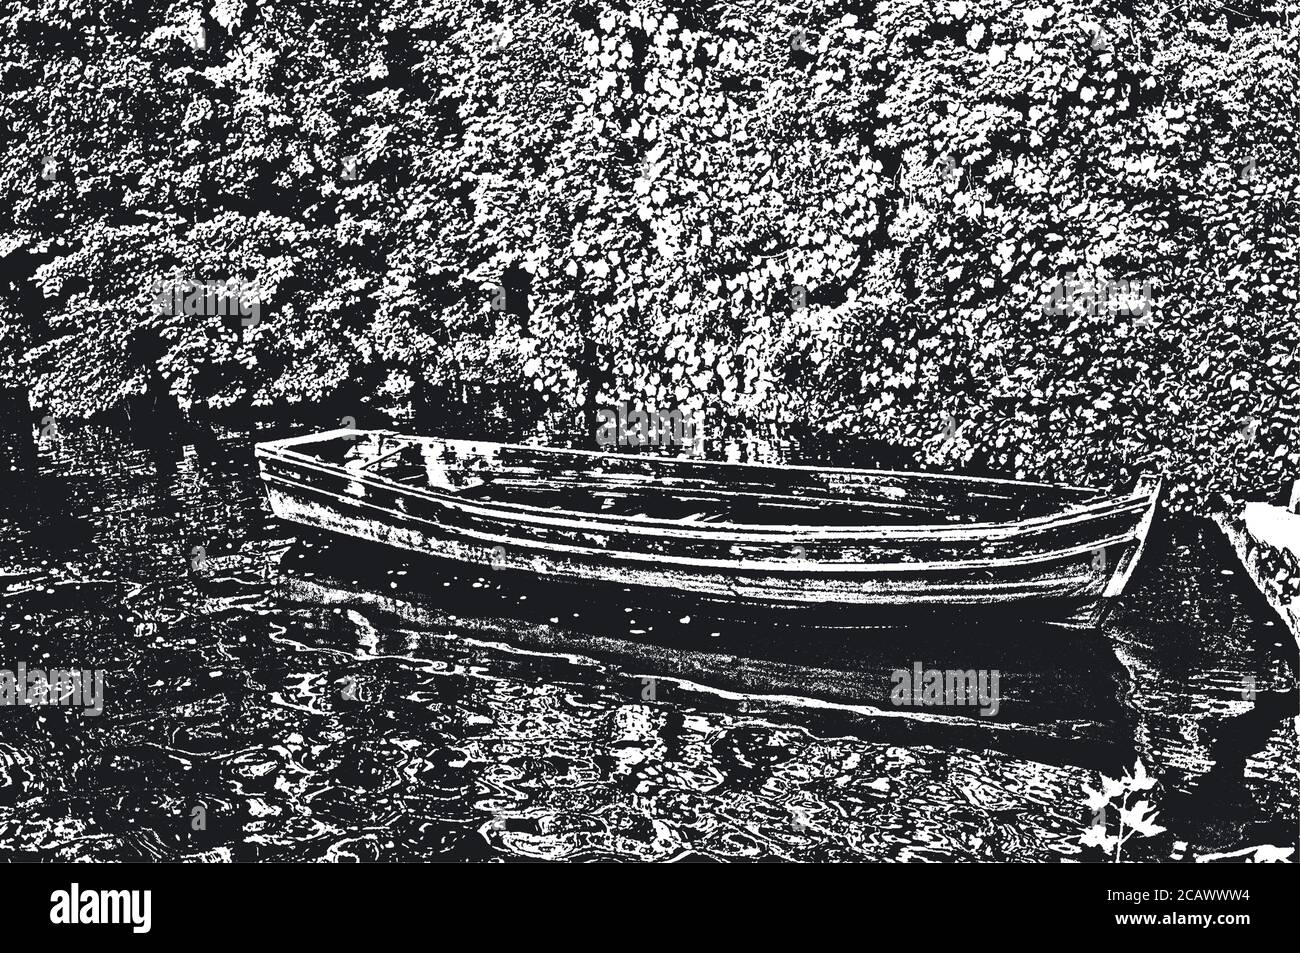 Old worn wooden boats on the river bank. Distressed vector Illustration. Black and white background. Stock Vector